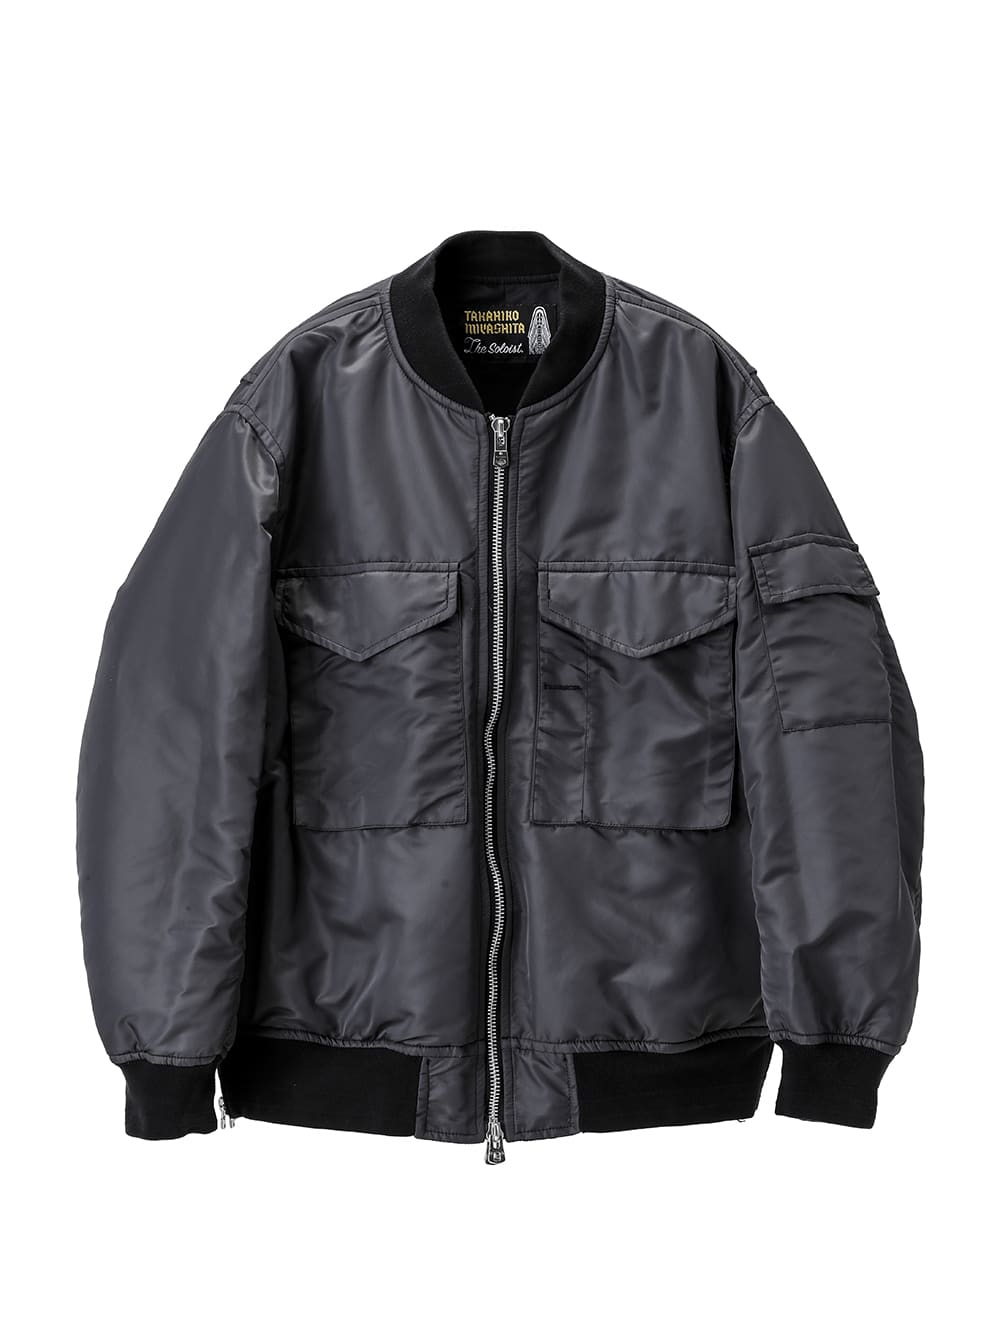 Size46bomber jacket The soloist. - ブルゾン